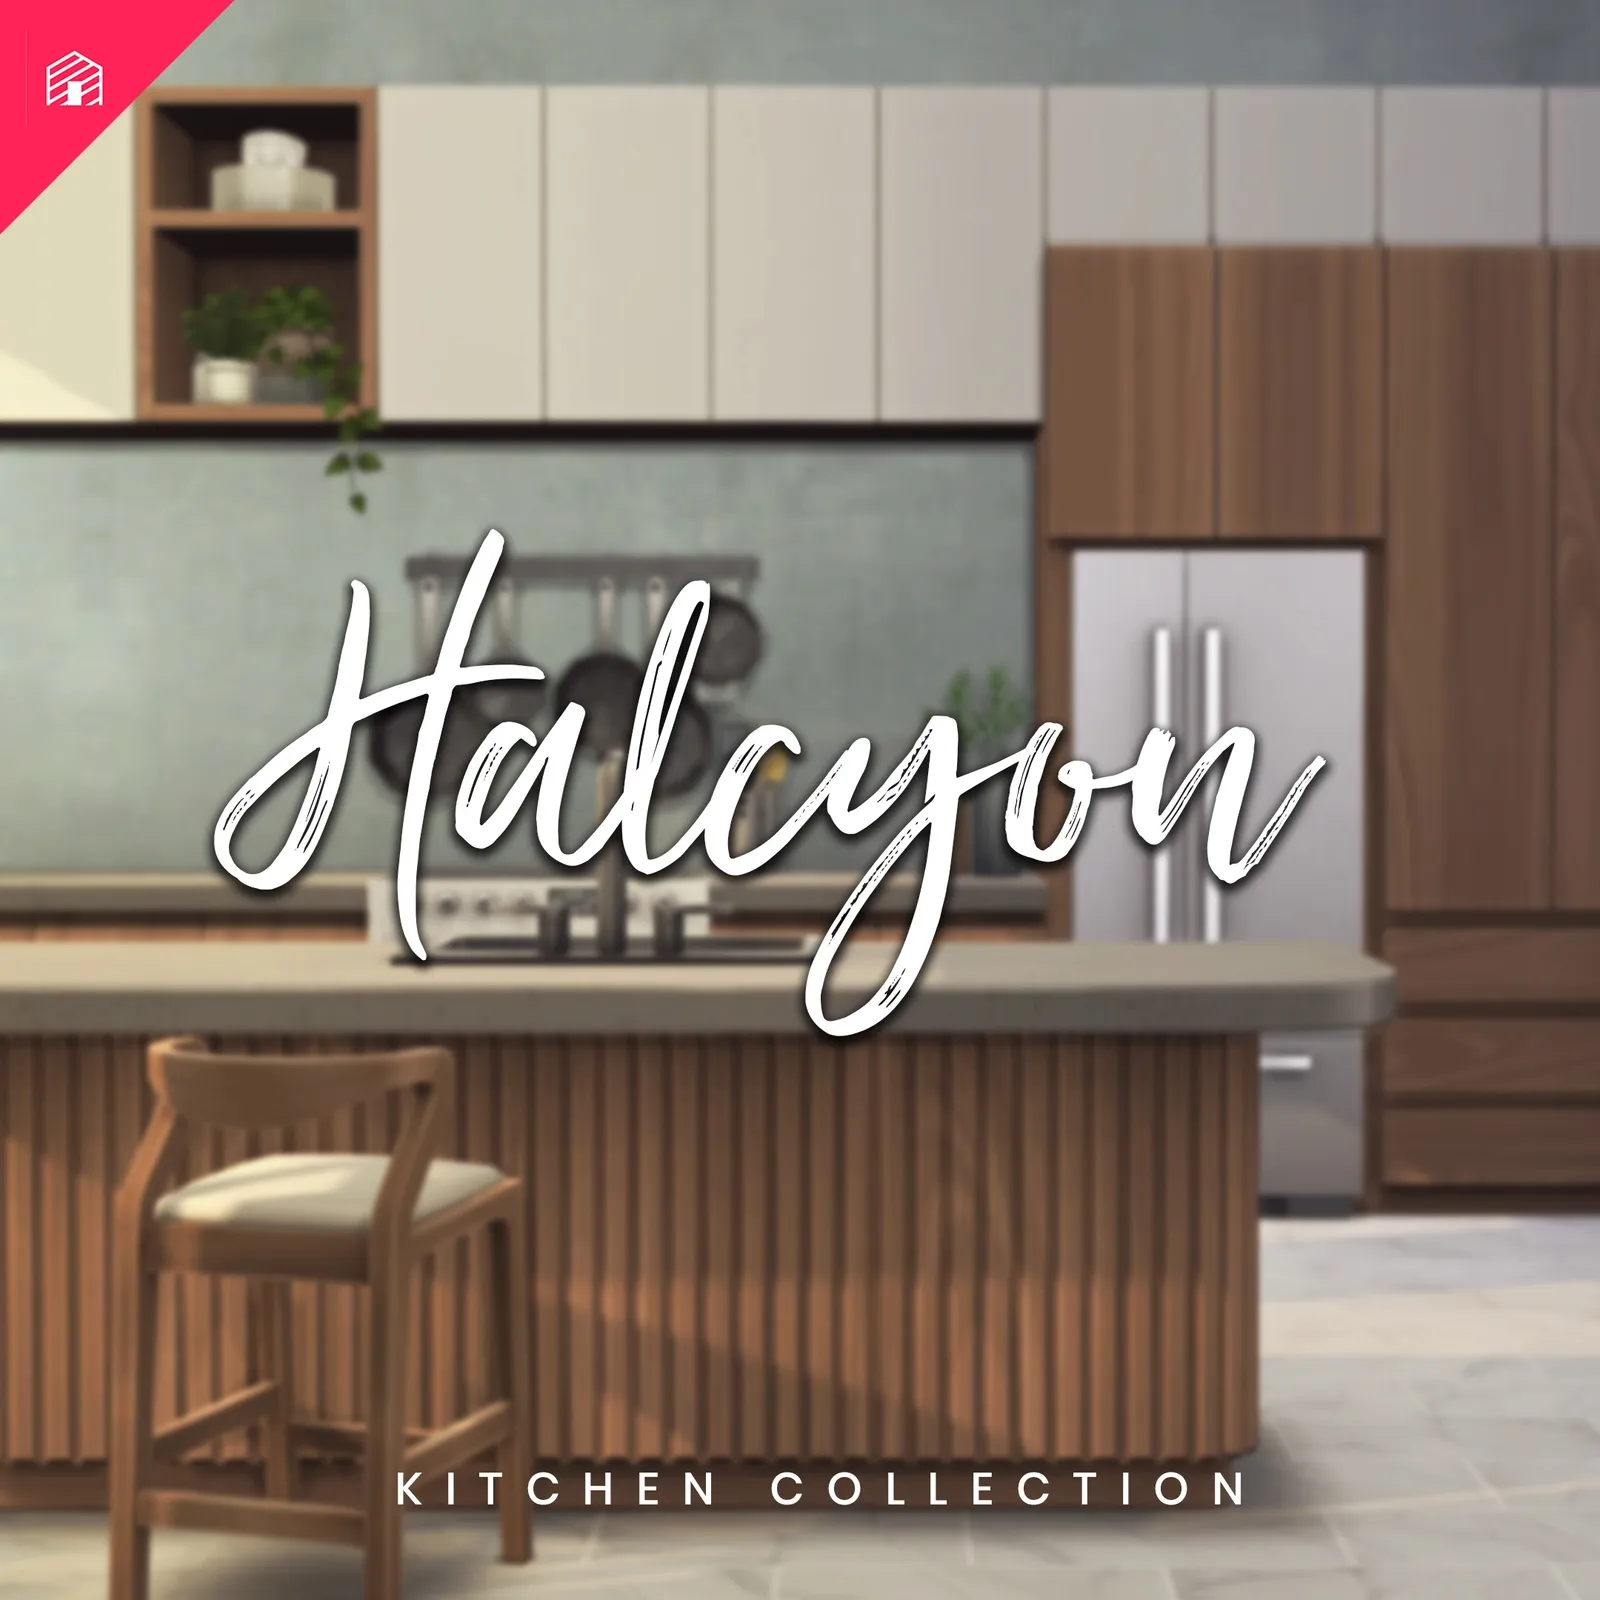 The Halcyon Kitchen Collection